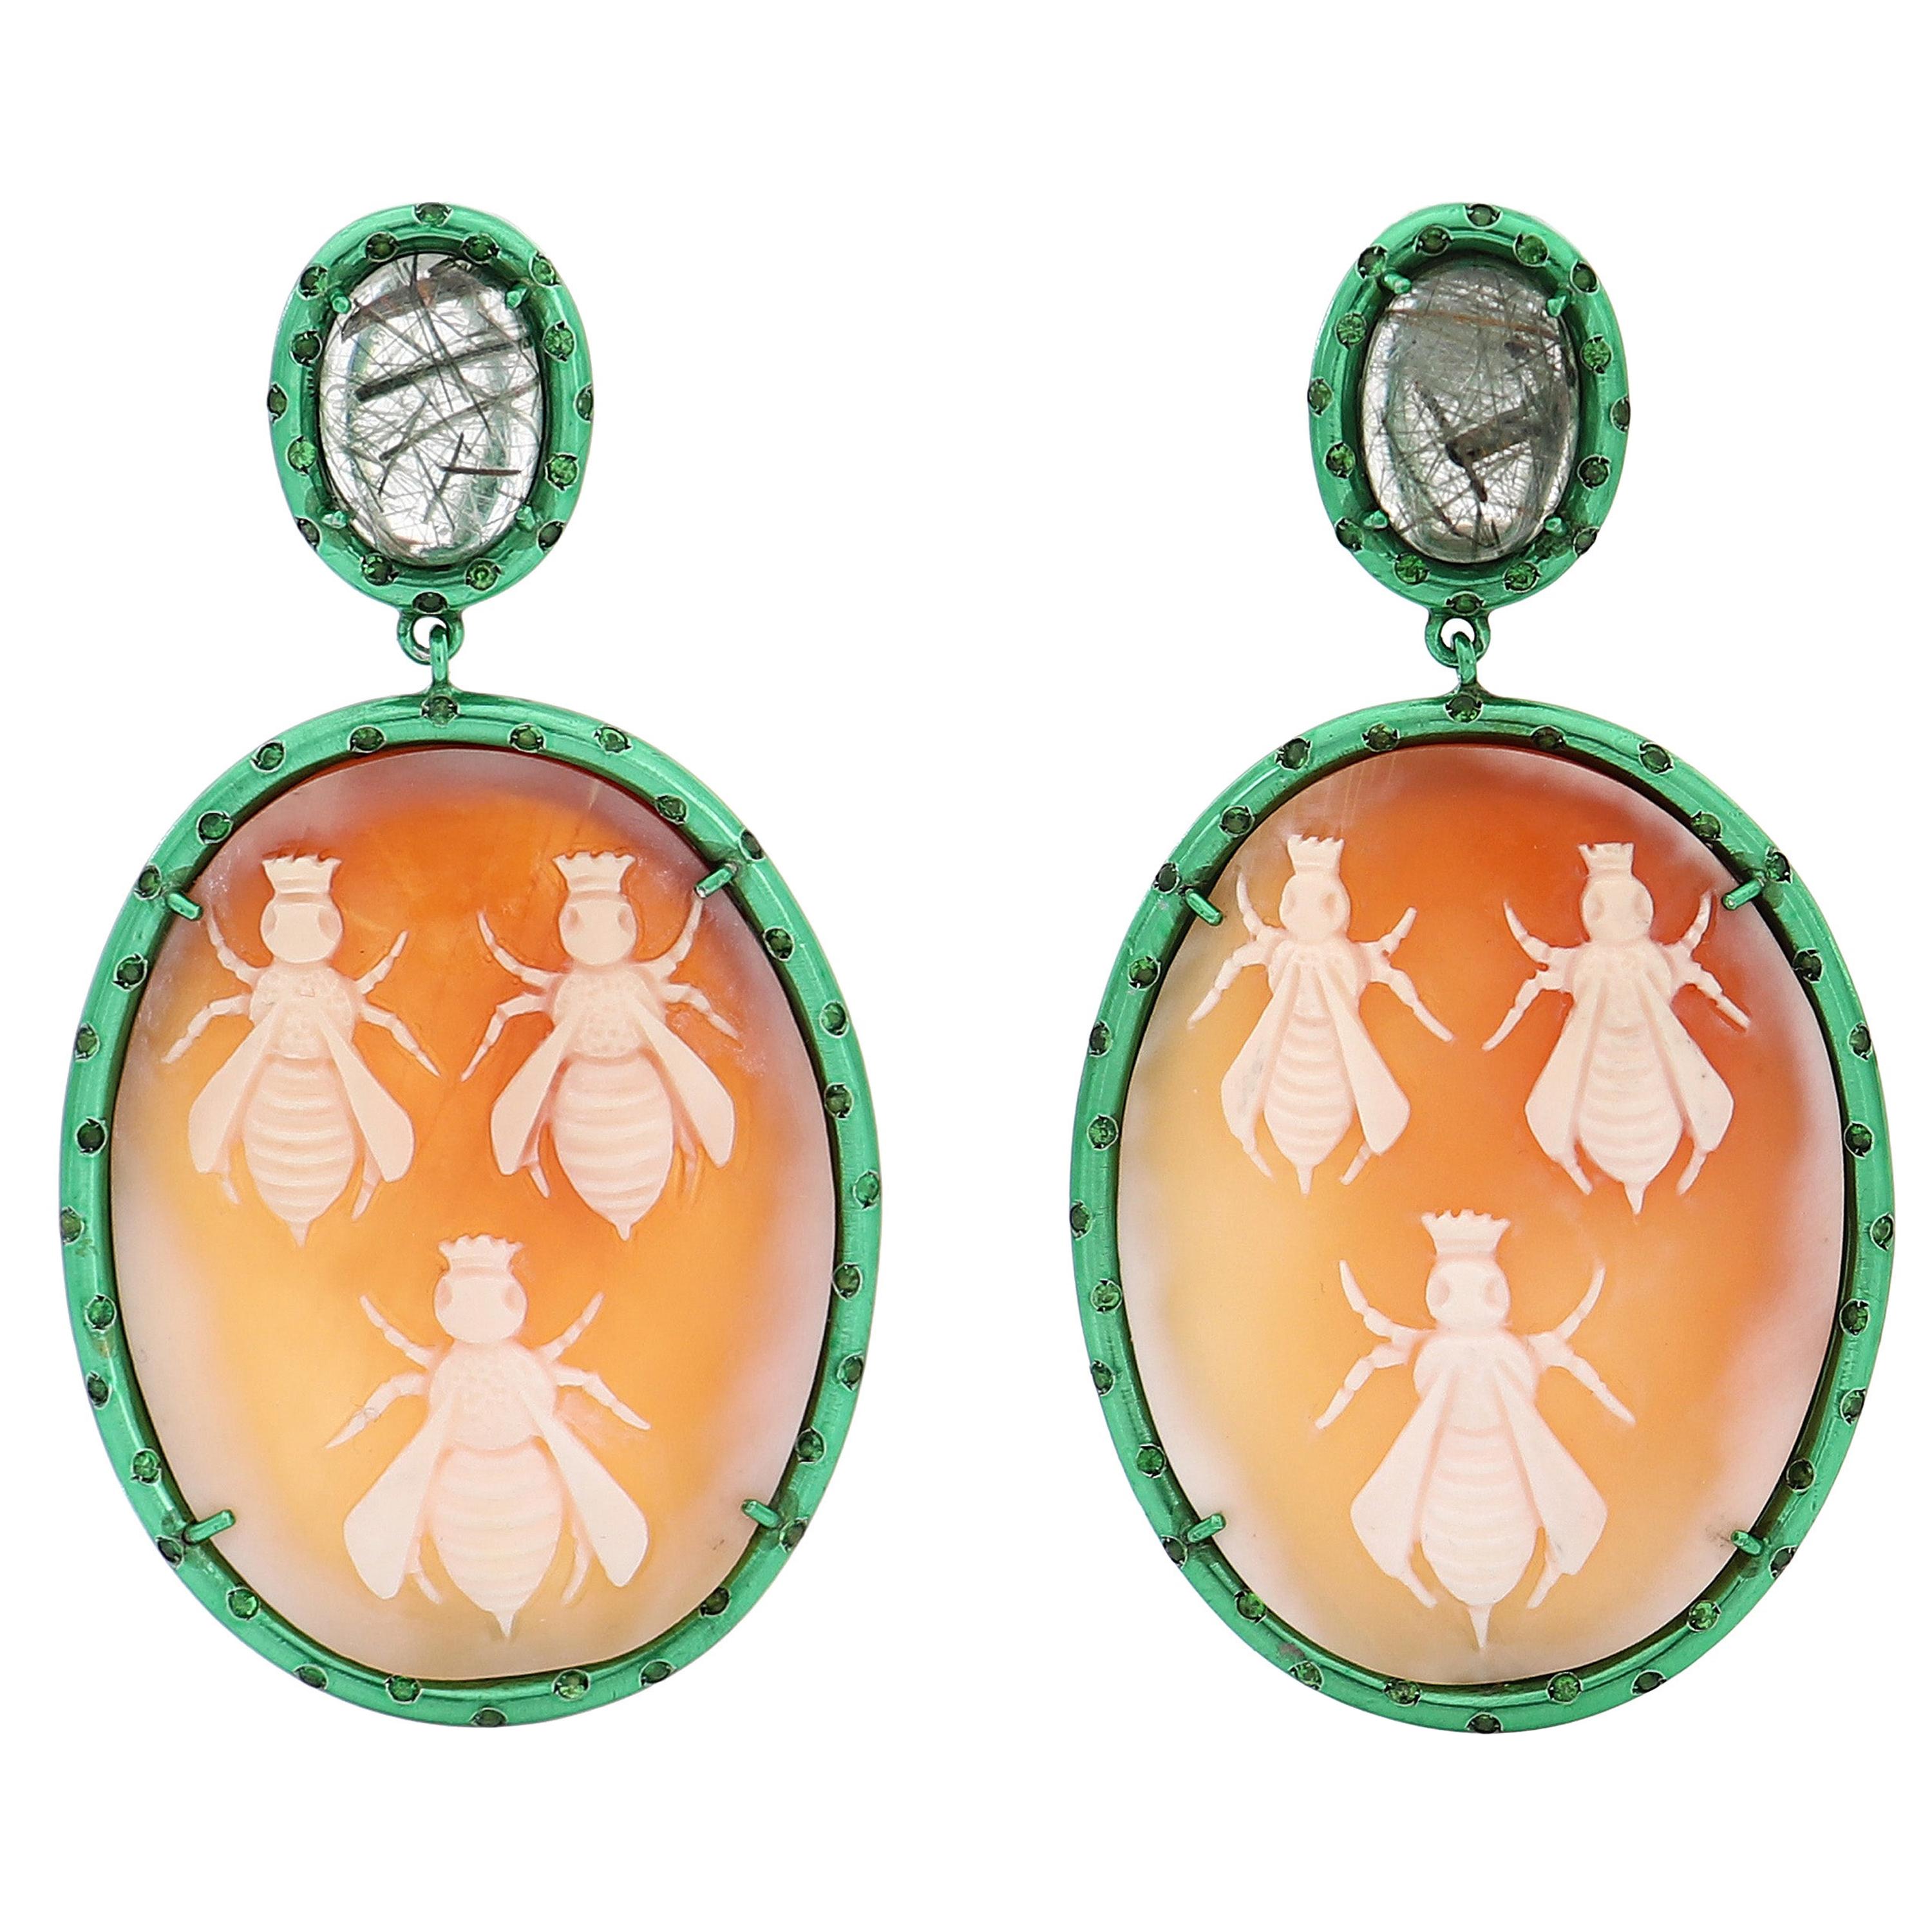 Amedeo Couture "Bees" Cameo with Tsavorites For Sale